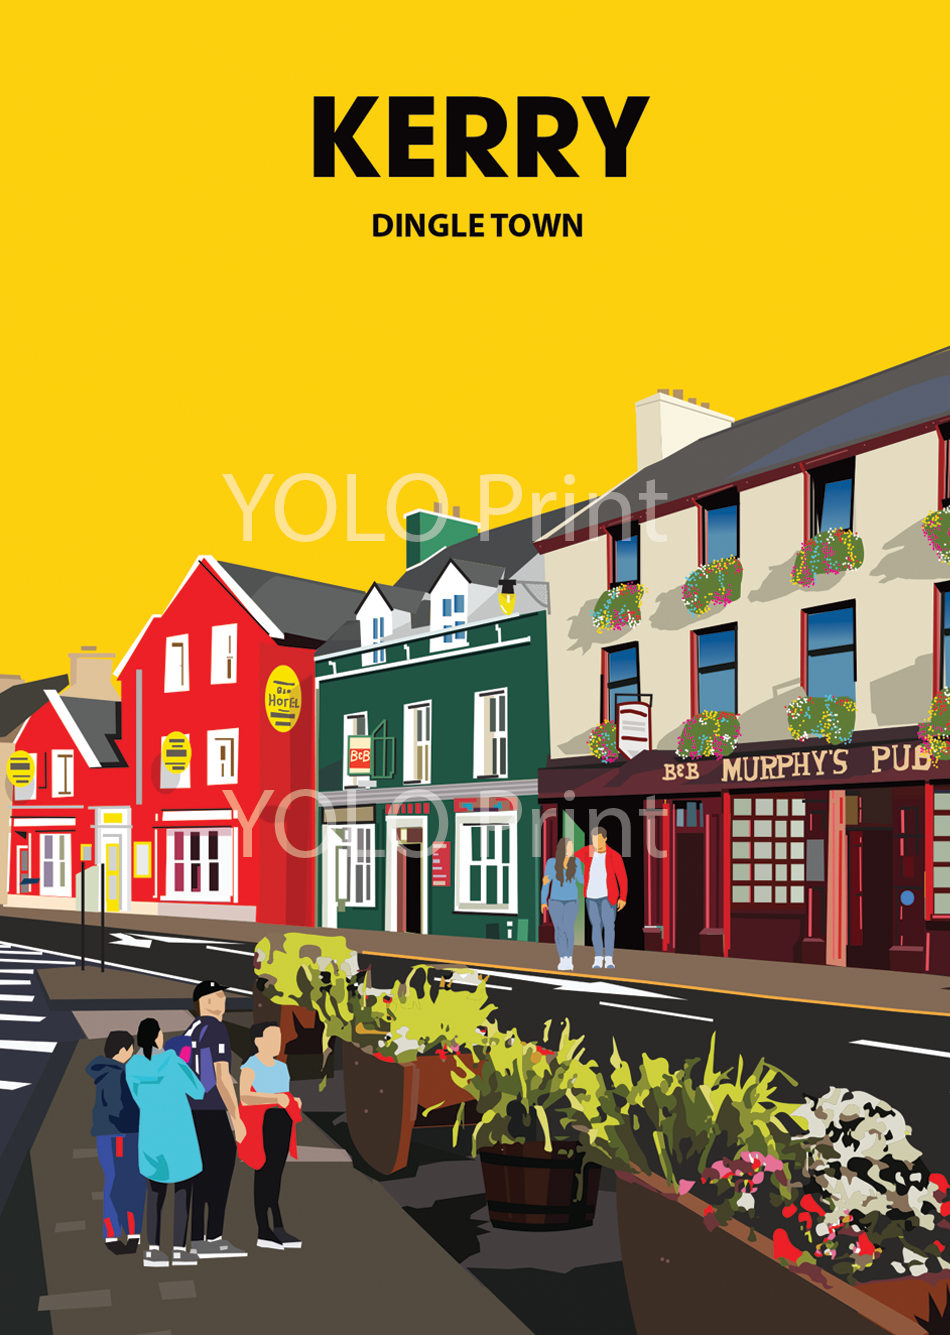 Kerry Postcard or A4 Mounted Print  - Dingle Town